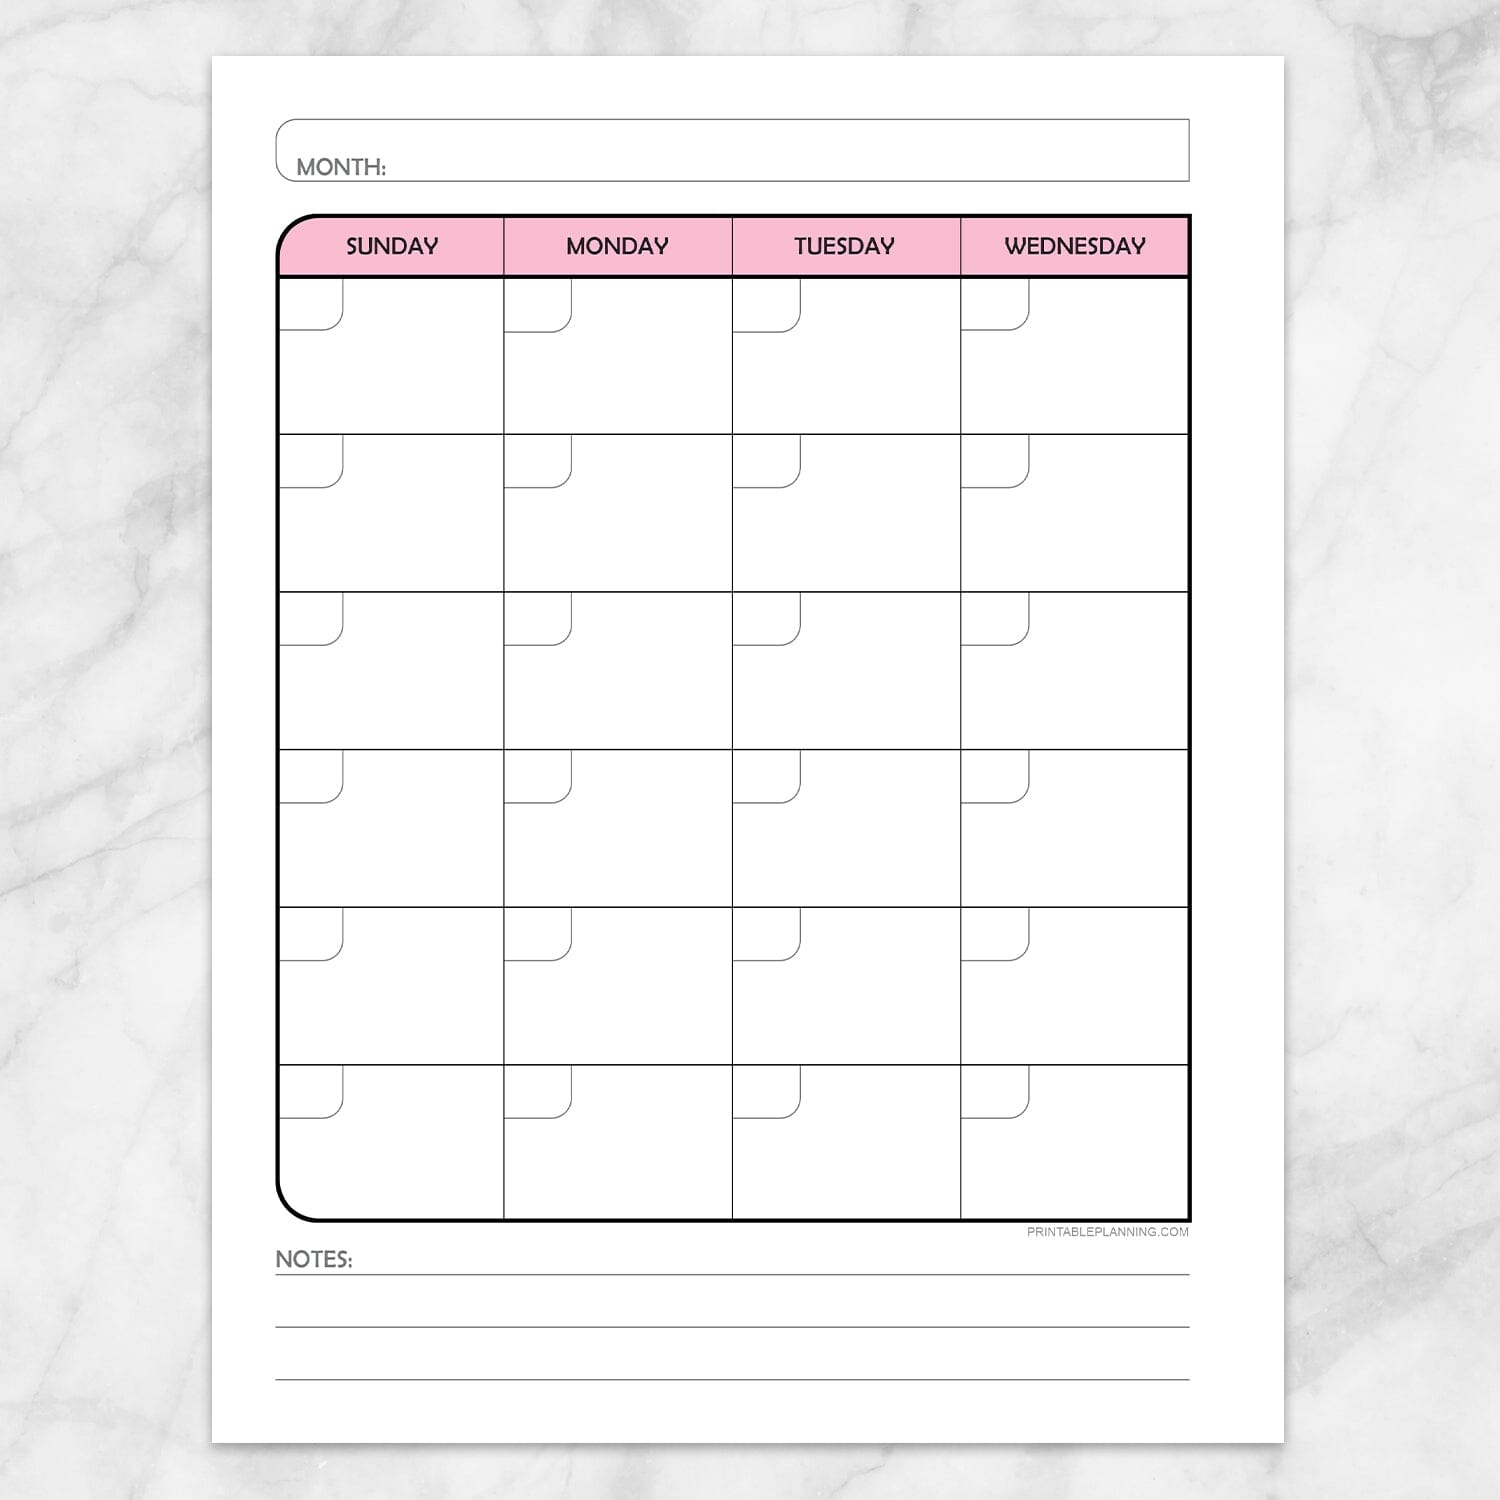 Printable Pink Monthly Calendar Planner Page (left page) at Printable Planning.